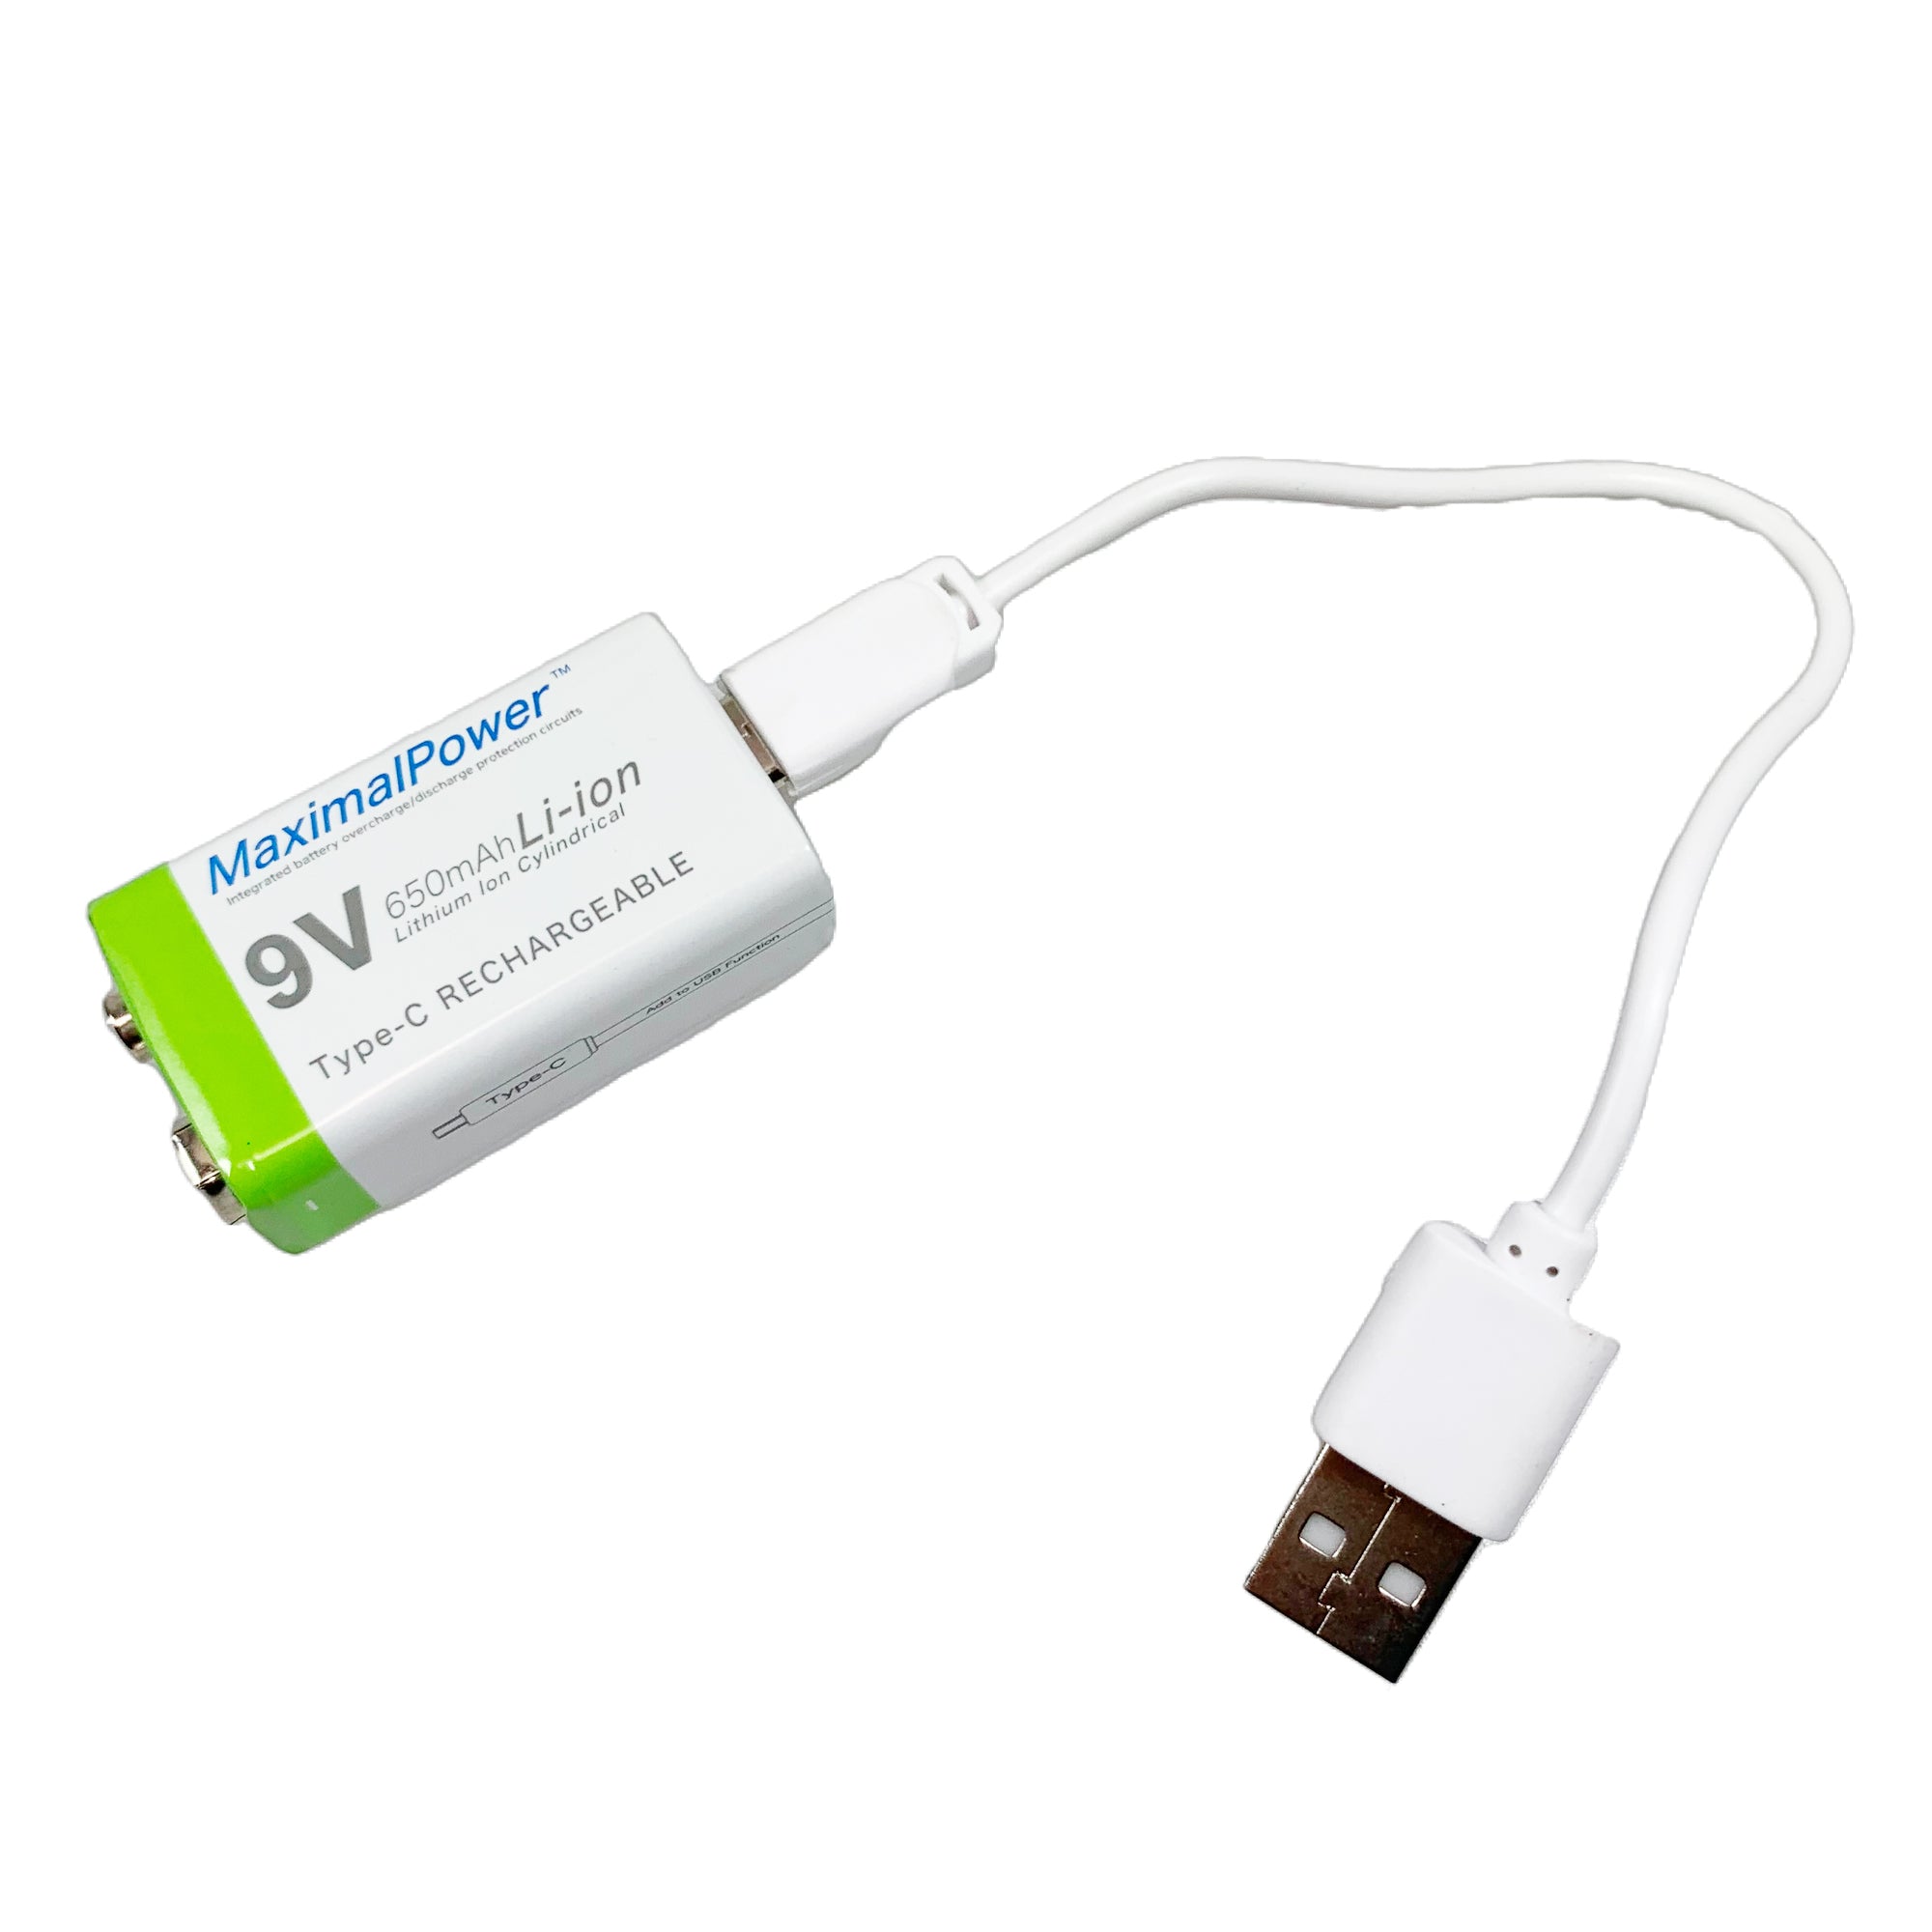 USB Rechargeable Lithium-Ion 9V Battery with Cable